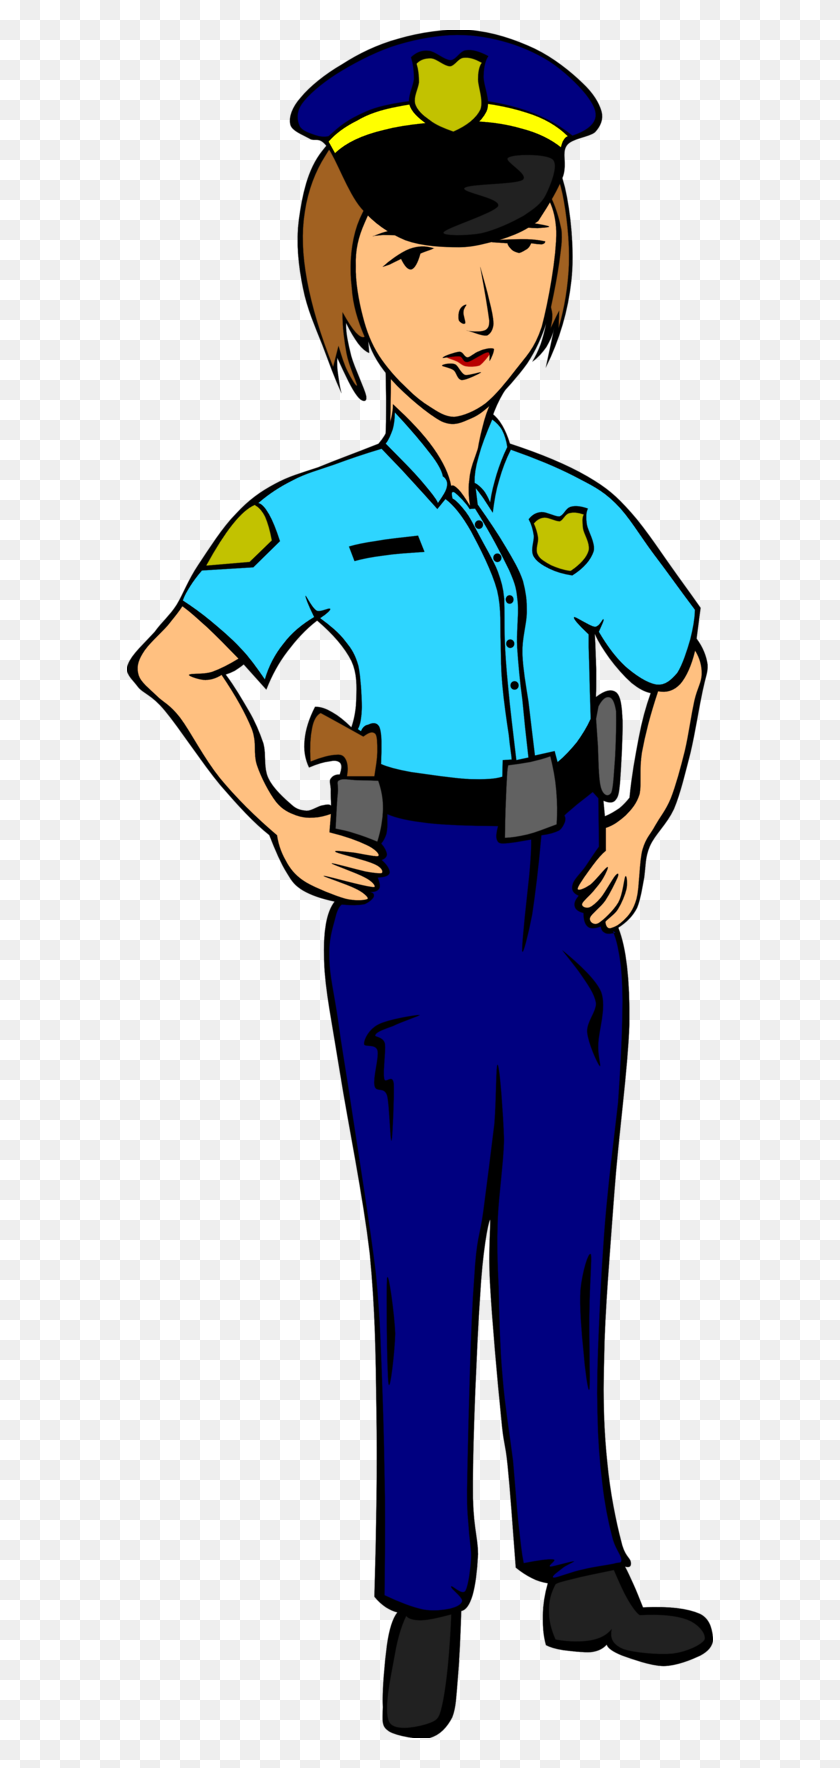 586x1708 Clipart Police - Clipartlord